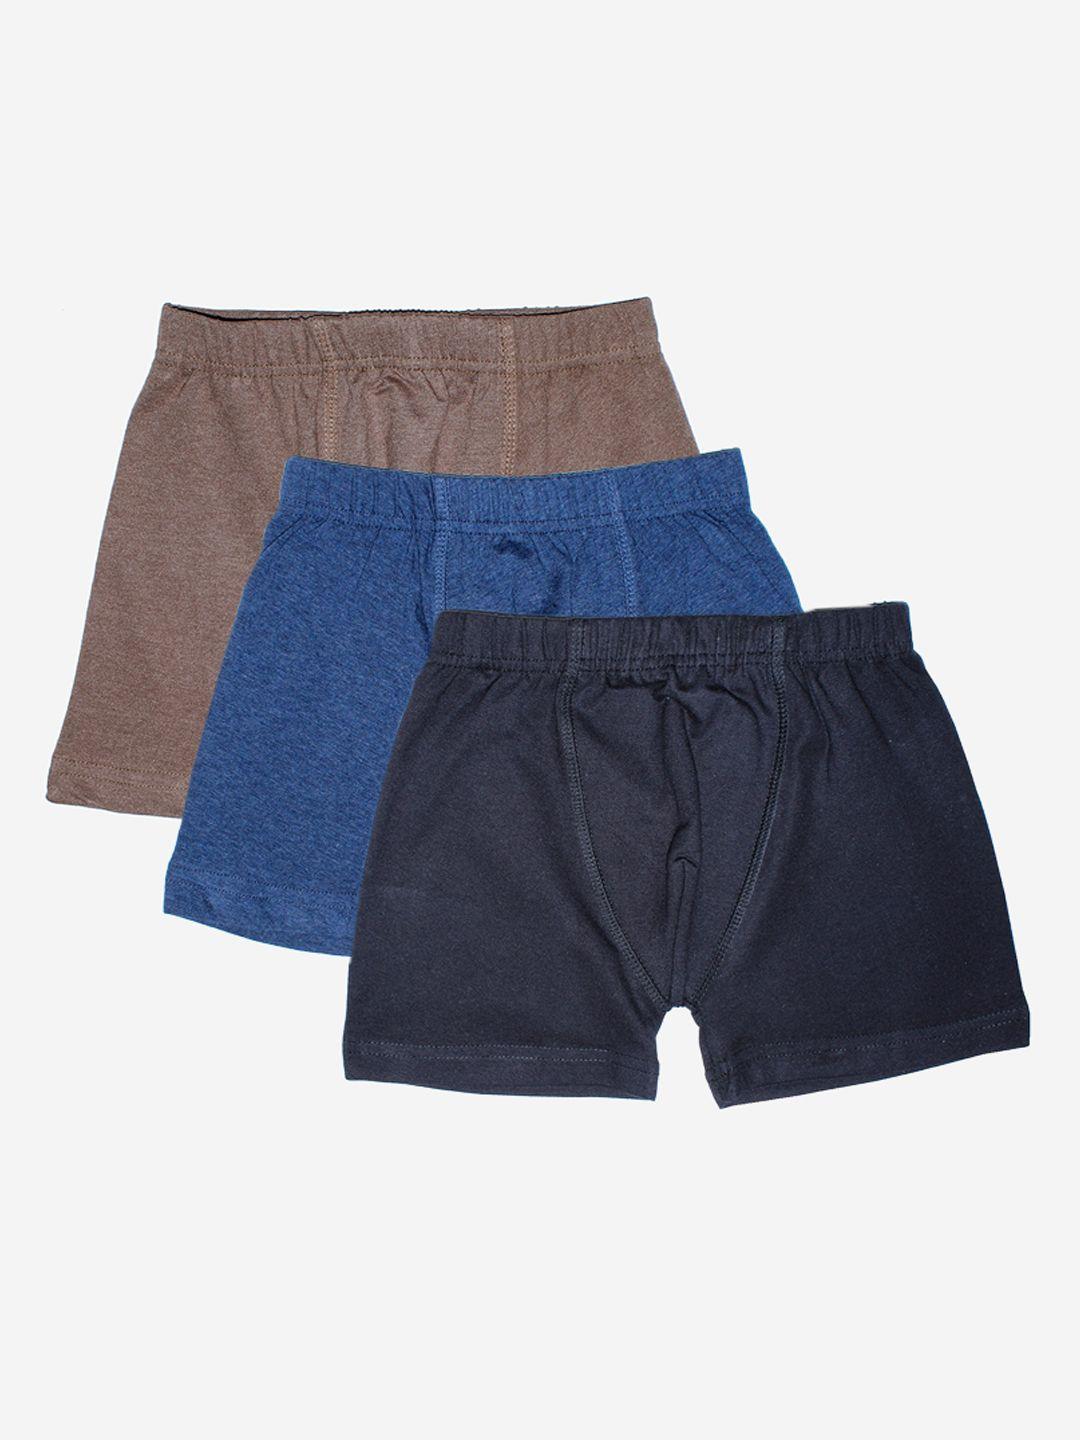 kiddopanti boys pack of 3 assorted solid boxer shorts